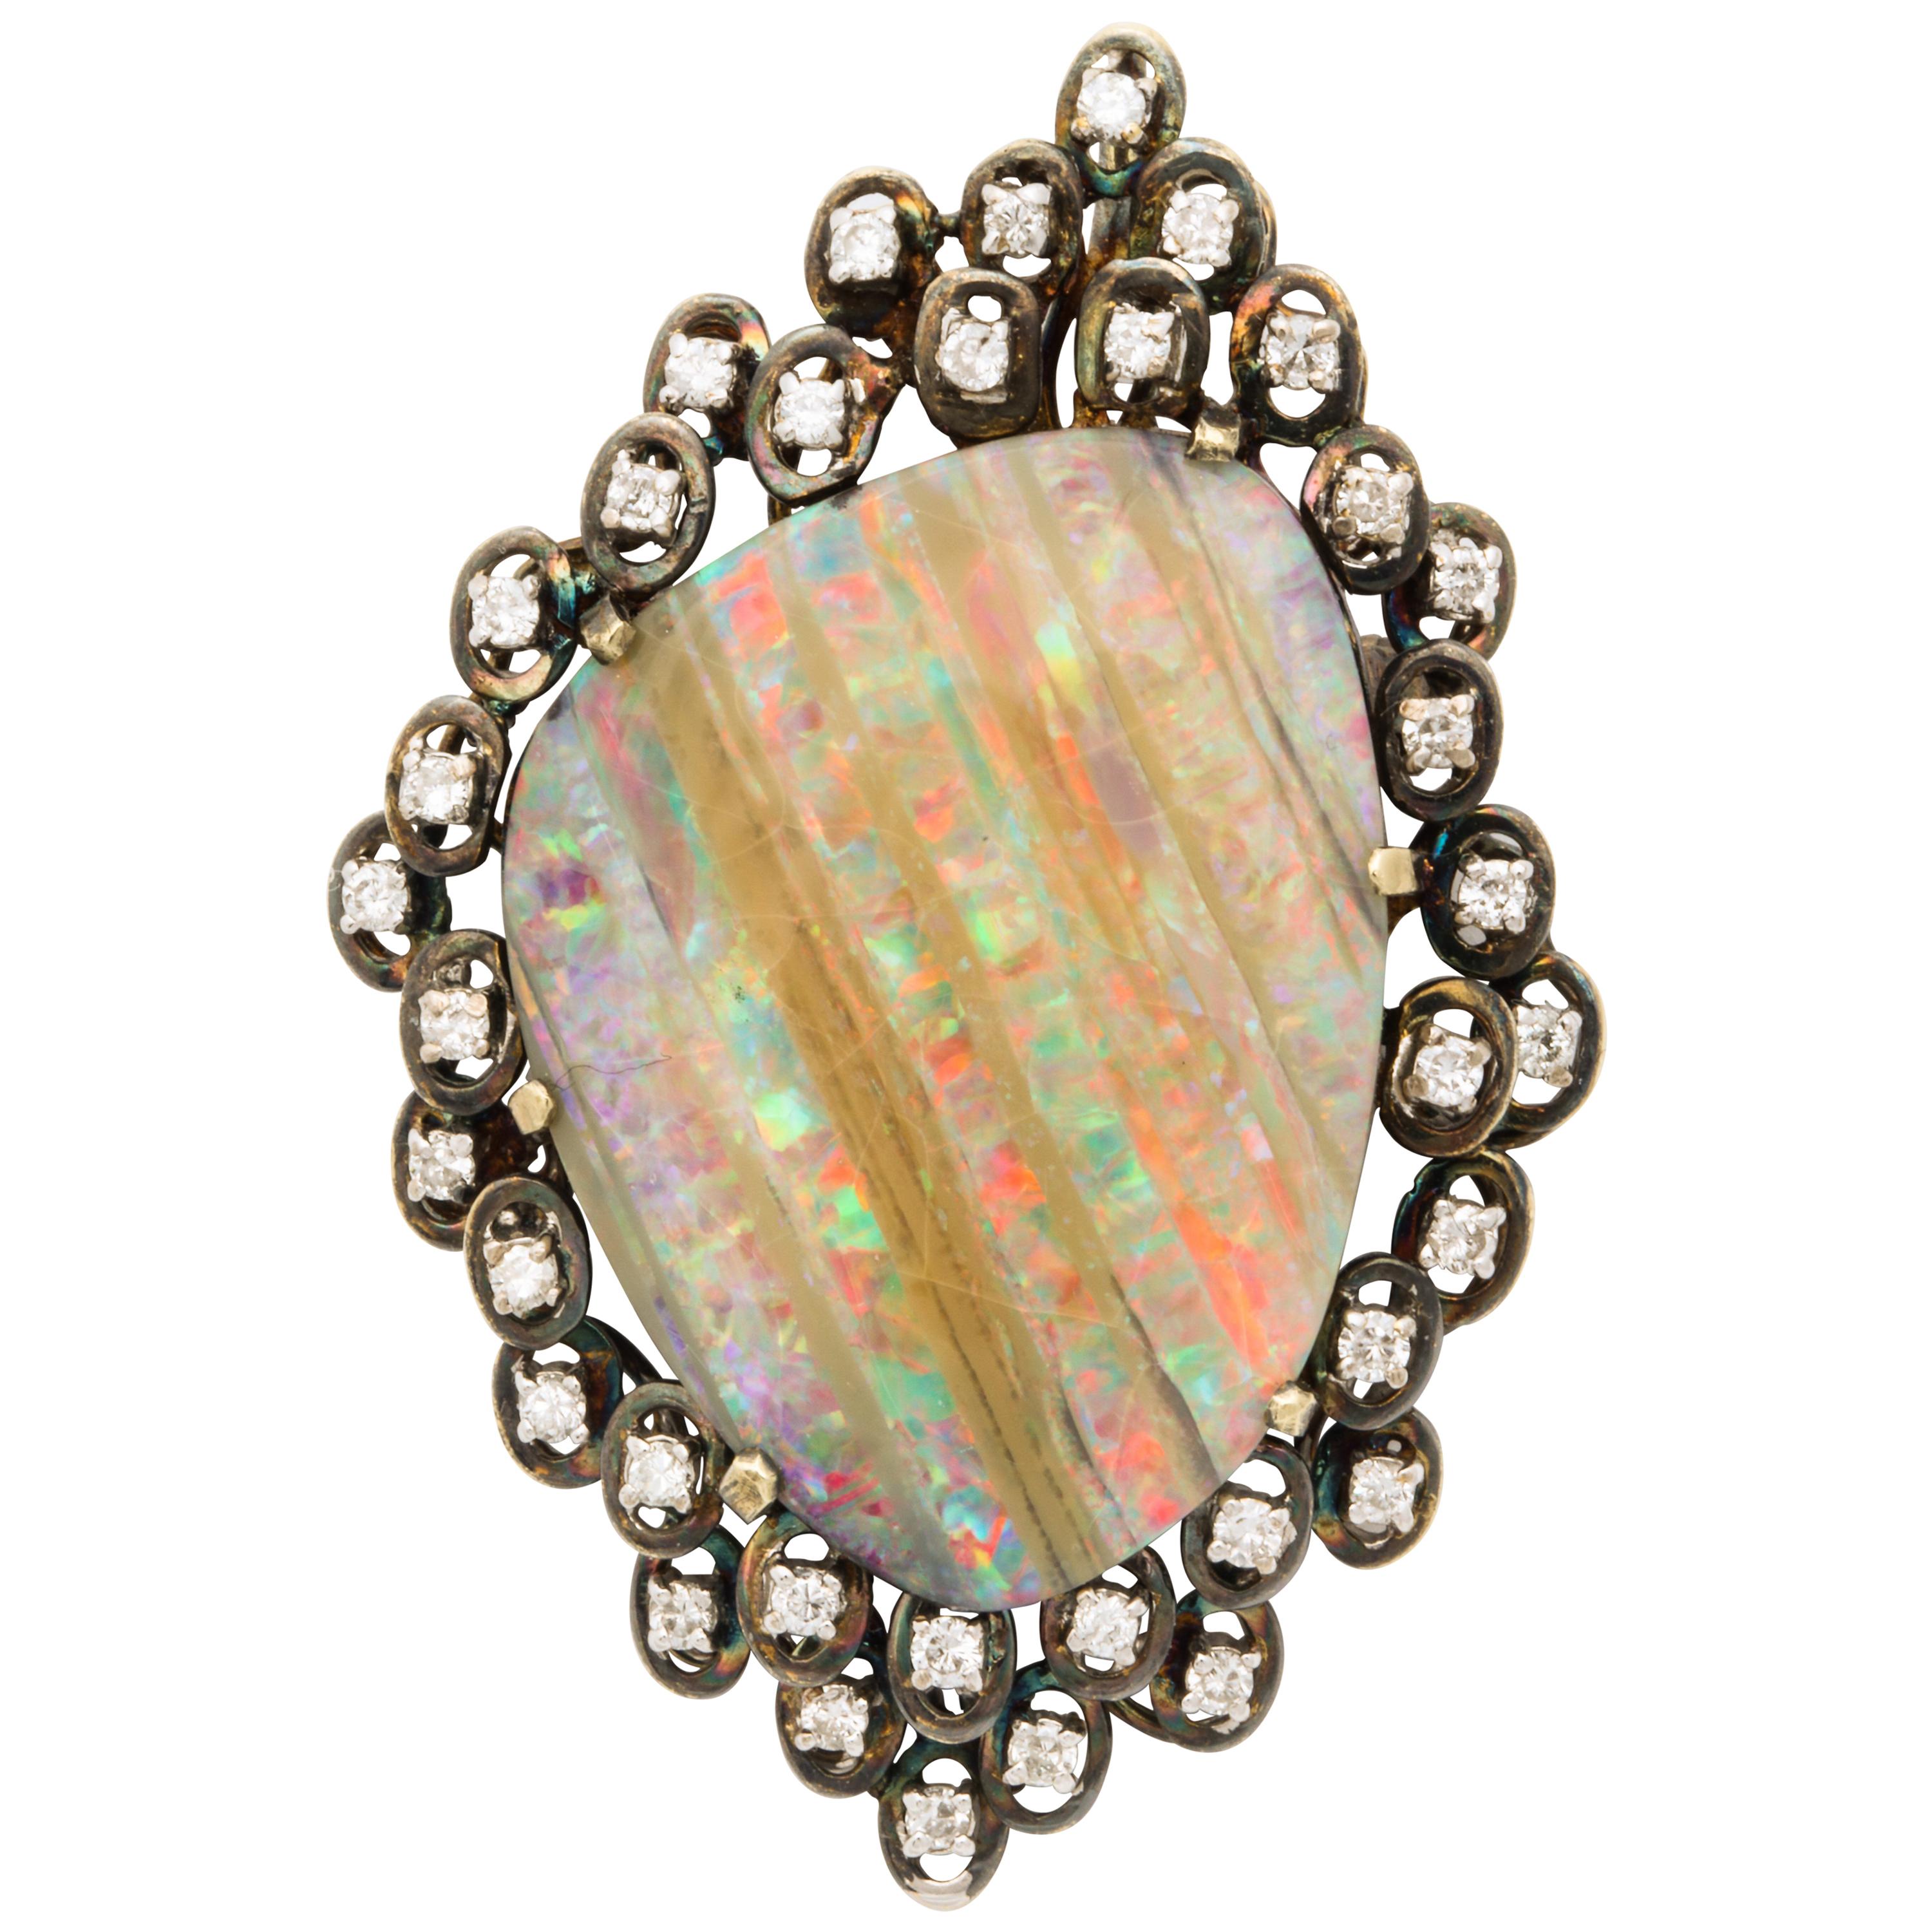 Large Opal Brooch or Pendant Surrounded by Diamonds Set in Gold